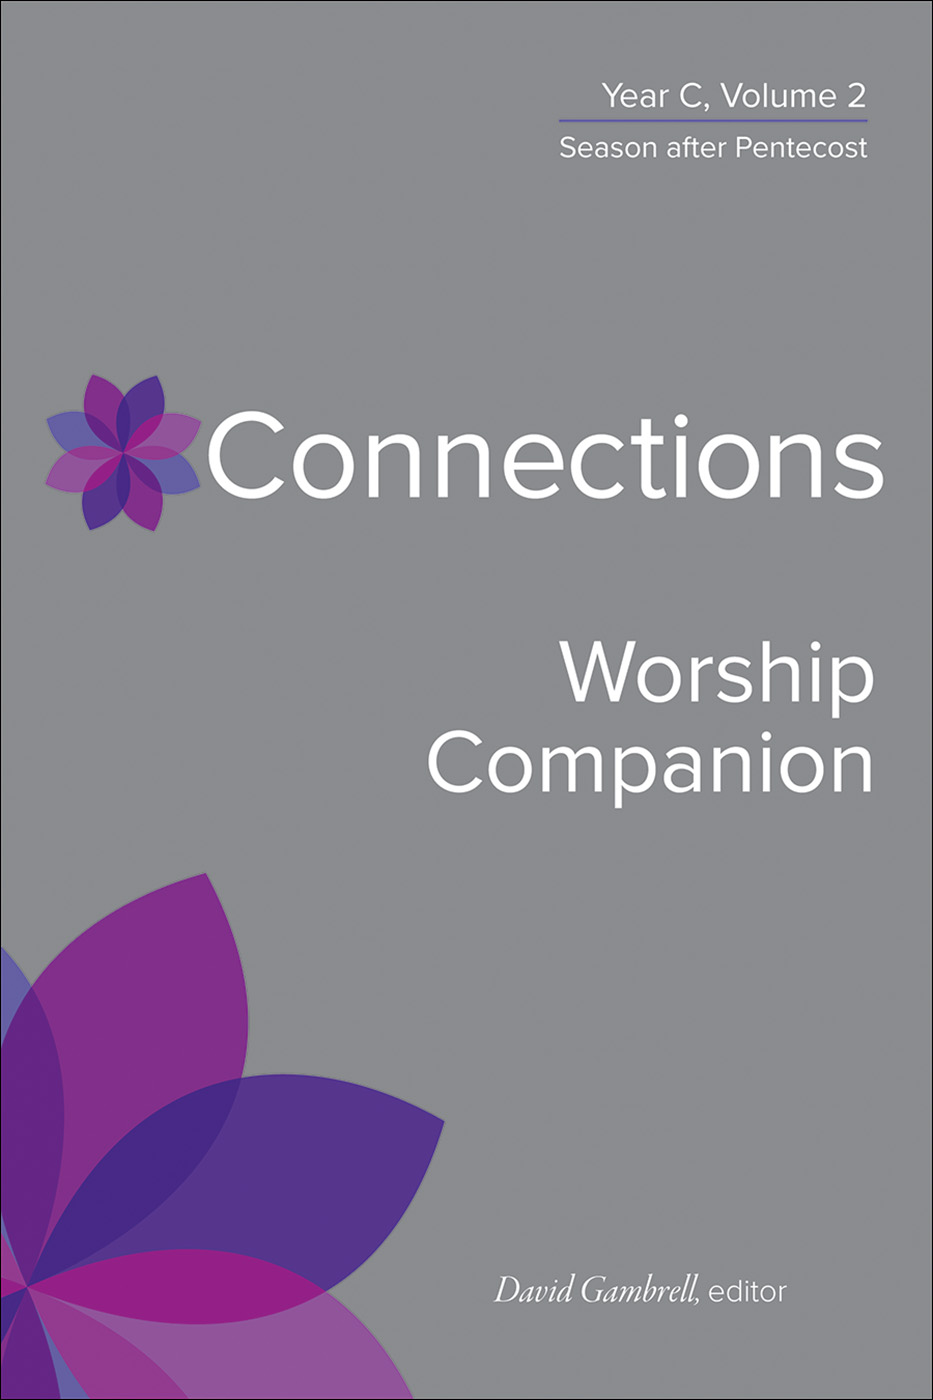 Connections Worship Companion, Year C Volume 2